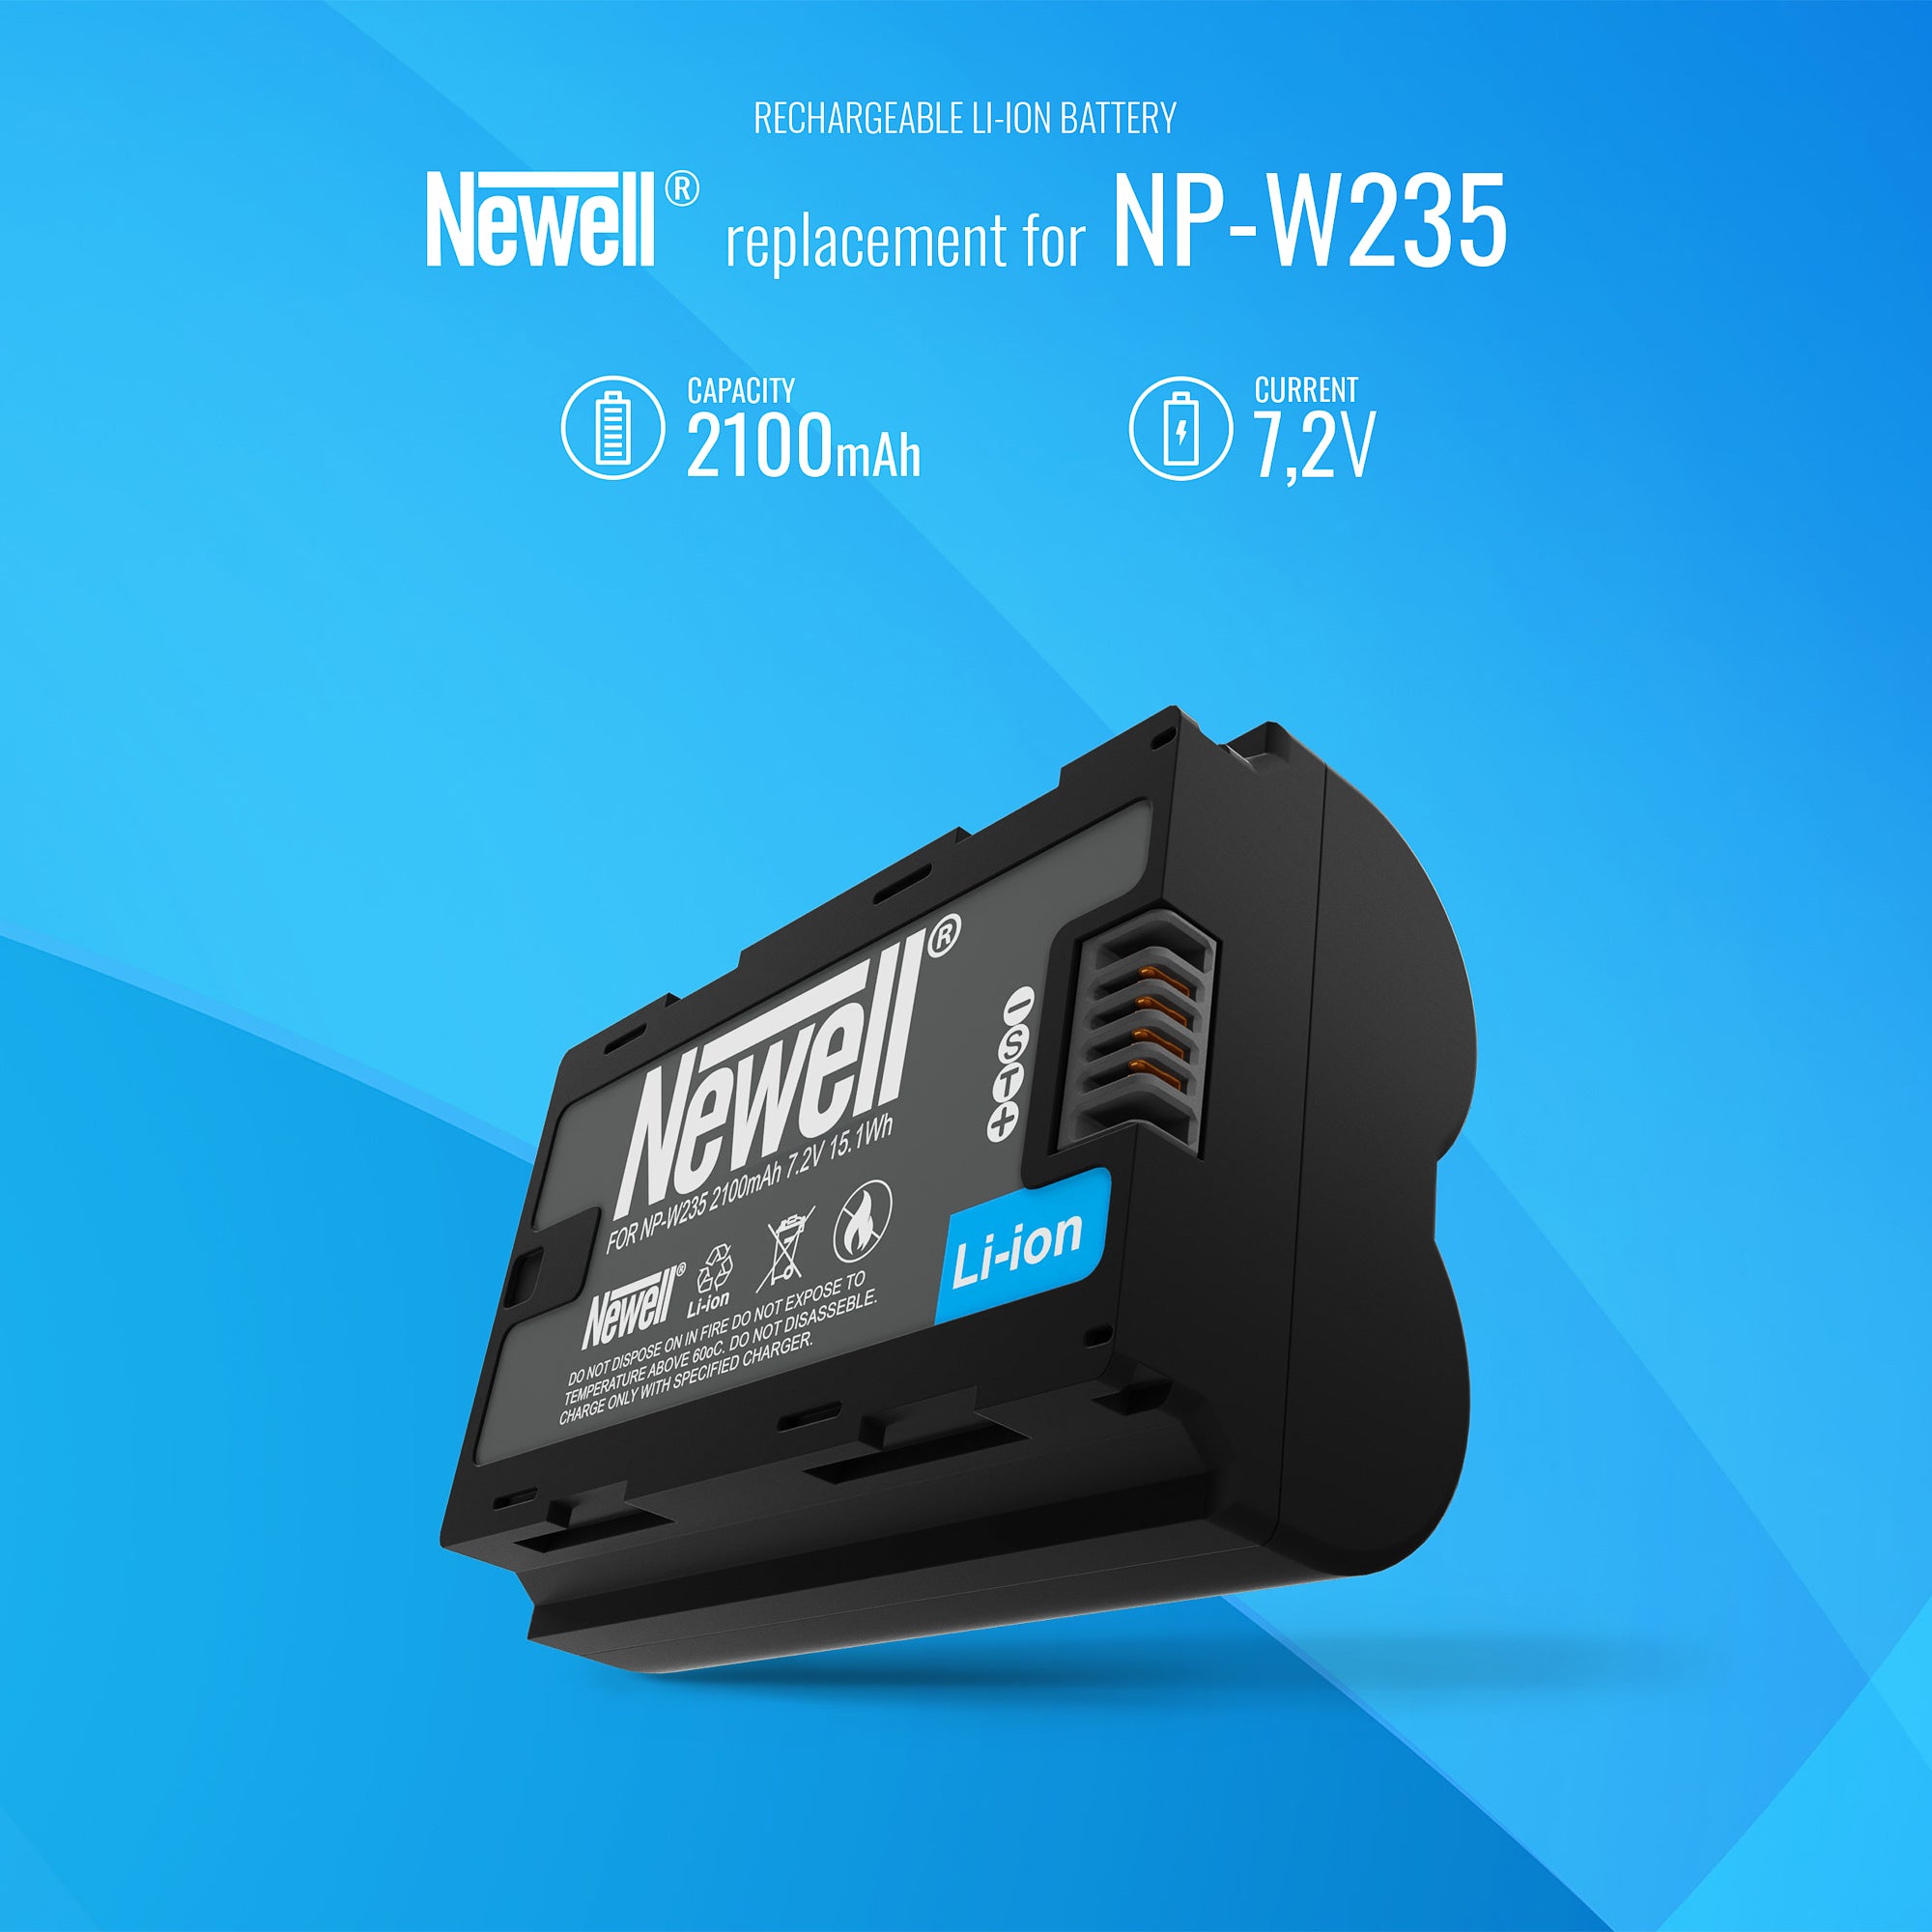 Newell rechargeable battery NP-W235